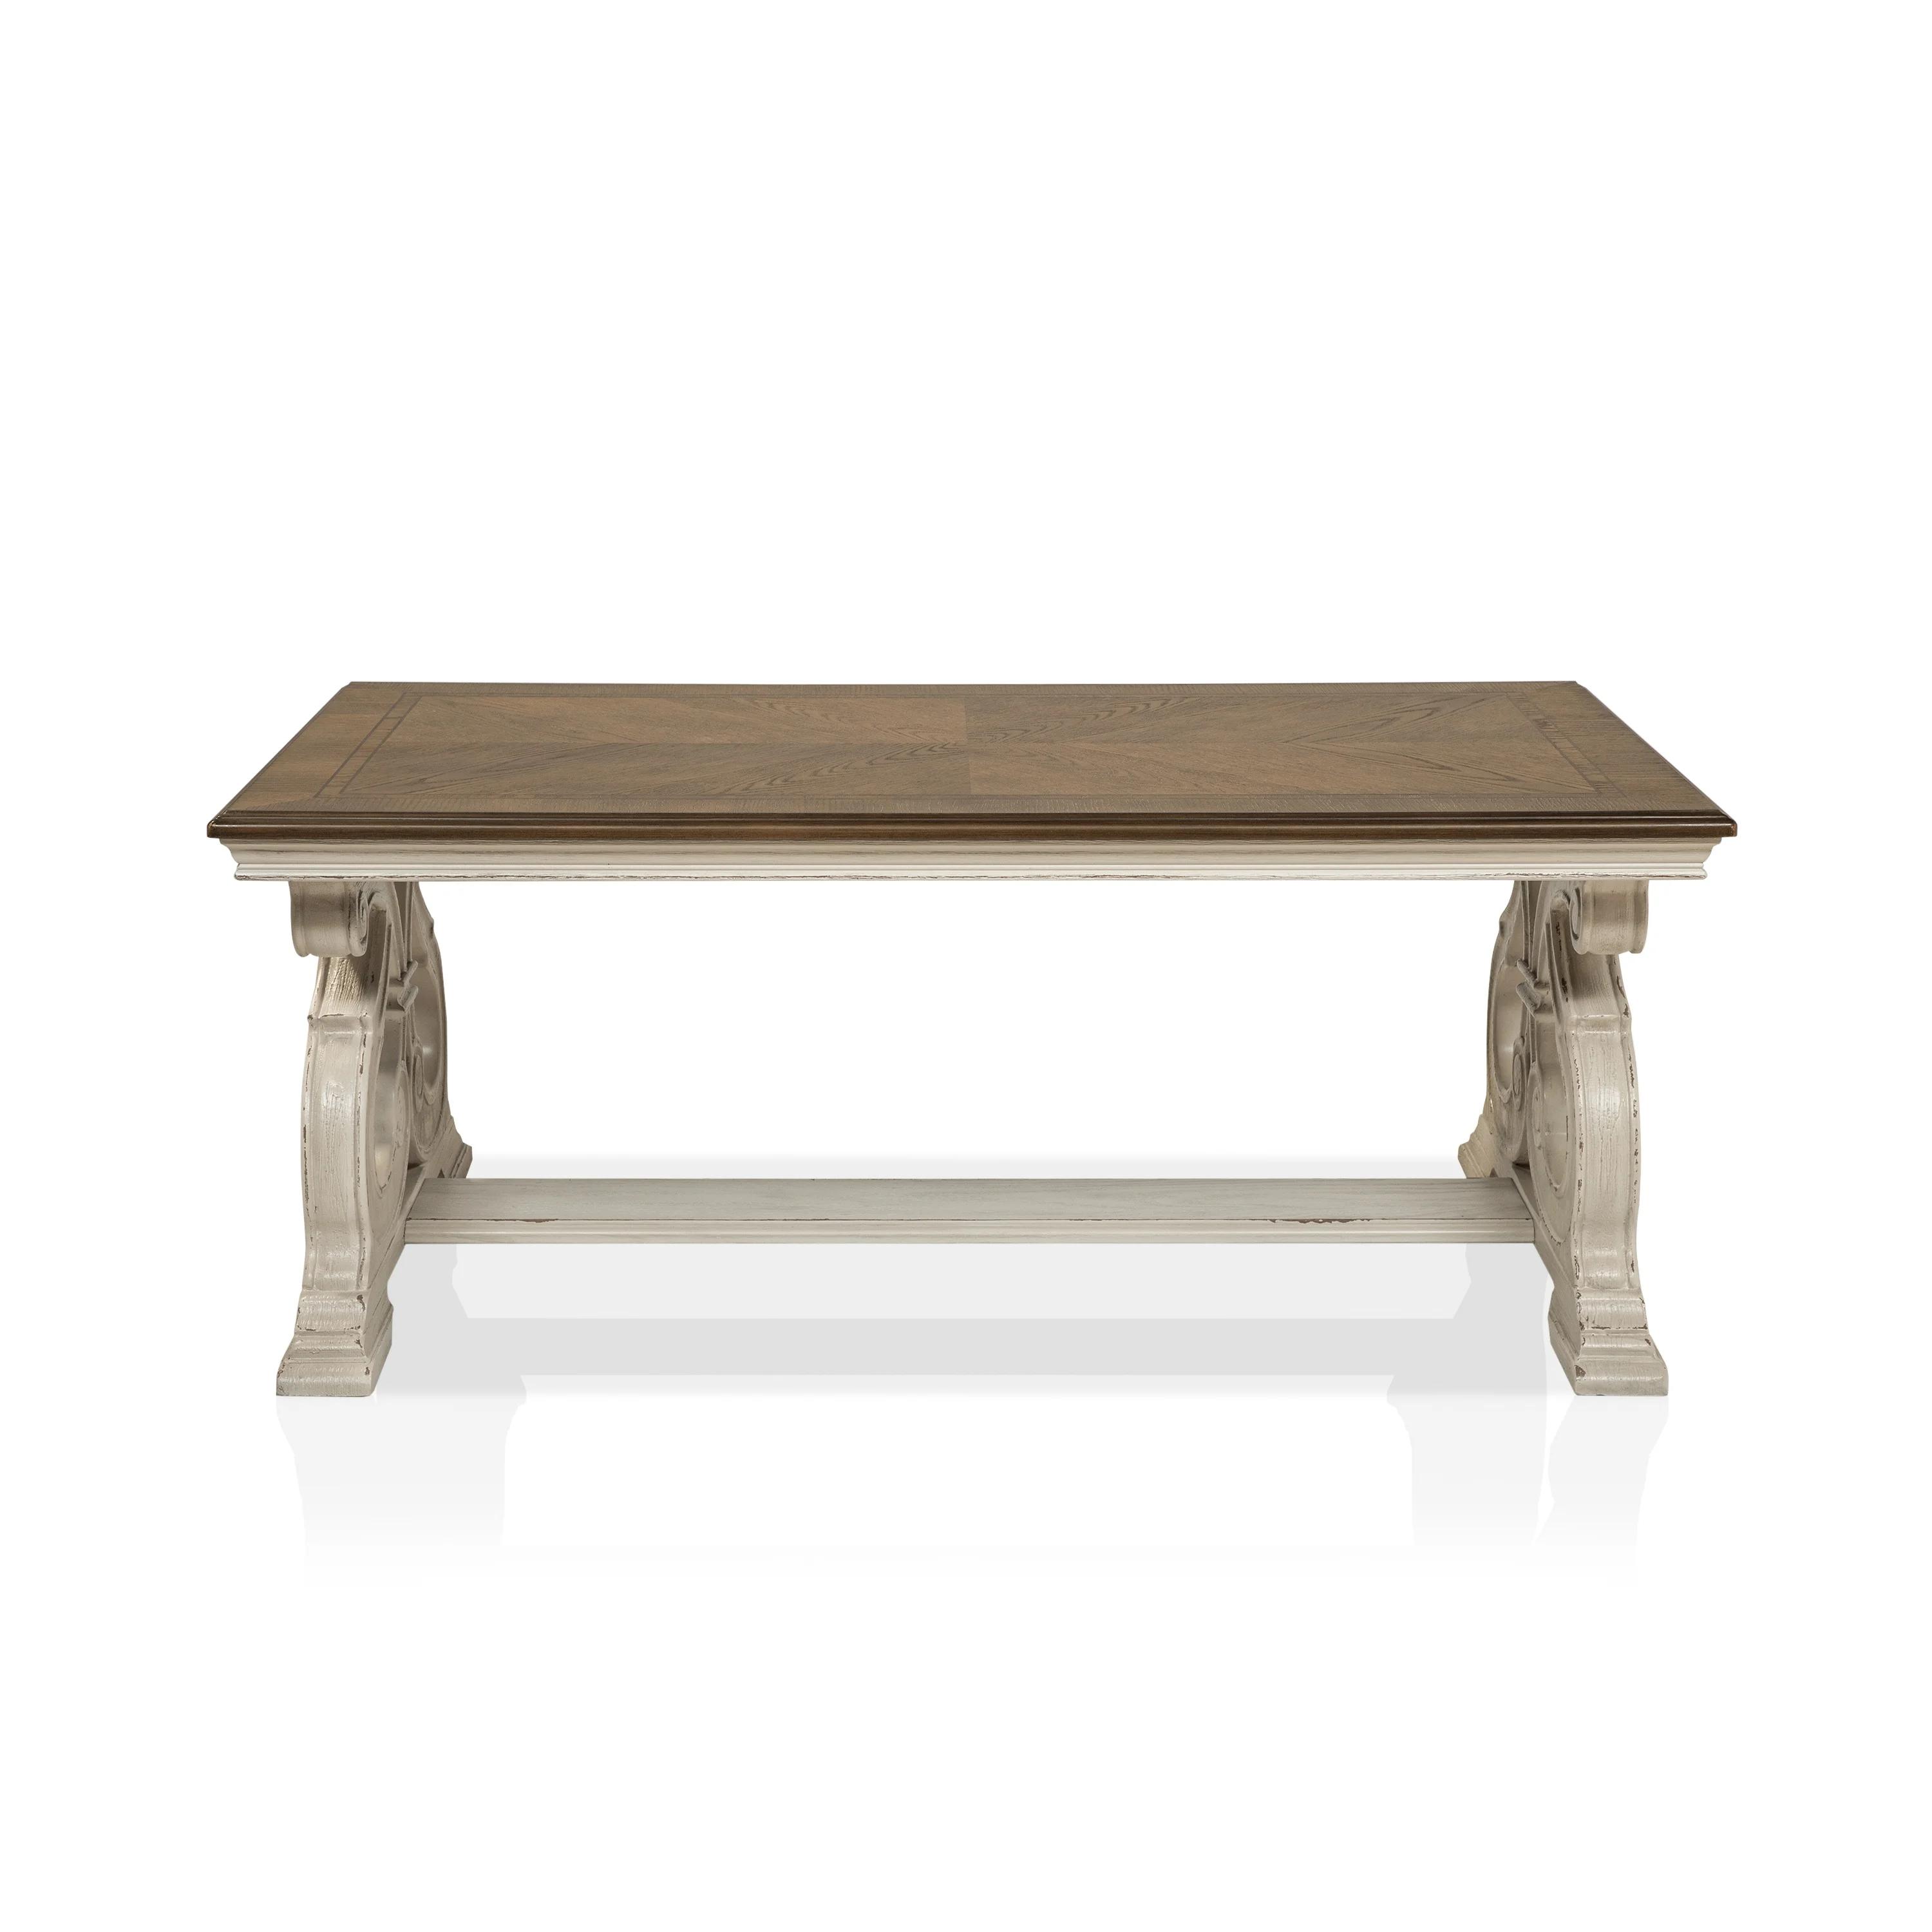 Classic, Traditional Coffee Table Clementine 4148-01 in Oak, Antique White 